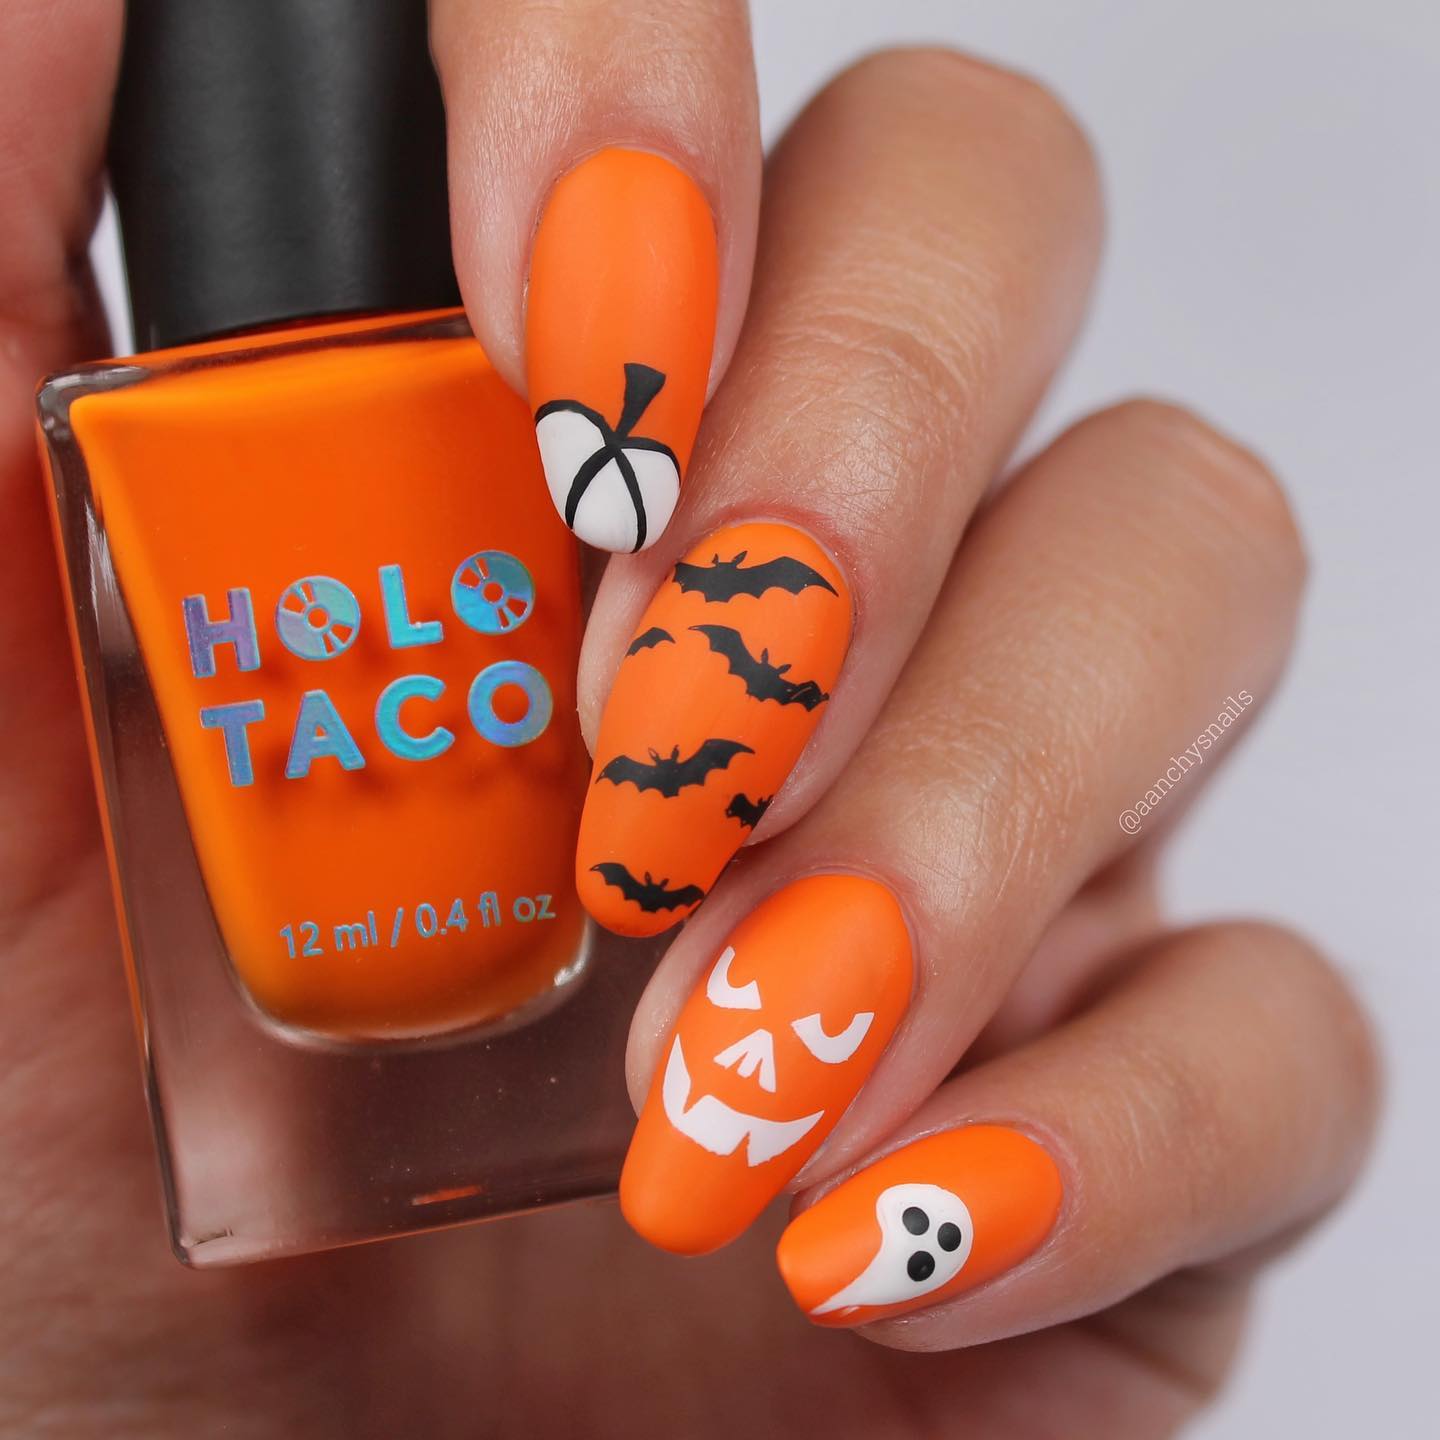 Matte orange is definitely a great choice for a Halloween manicure! I looks like you've dipped your nails in a pumpkin. When you add some nail art related to Halloween, you are ready for the spooky holiday but you can use this plain color for your daily life, too.